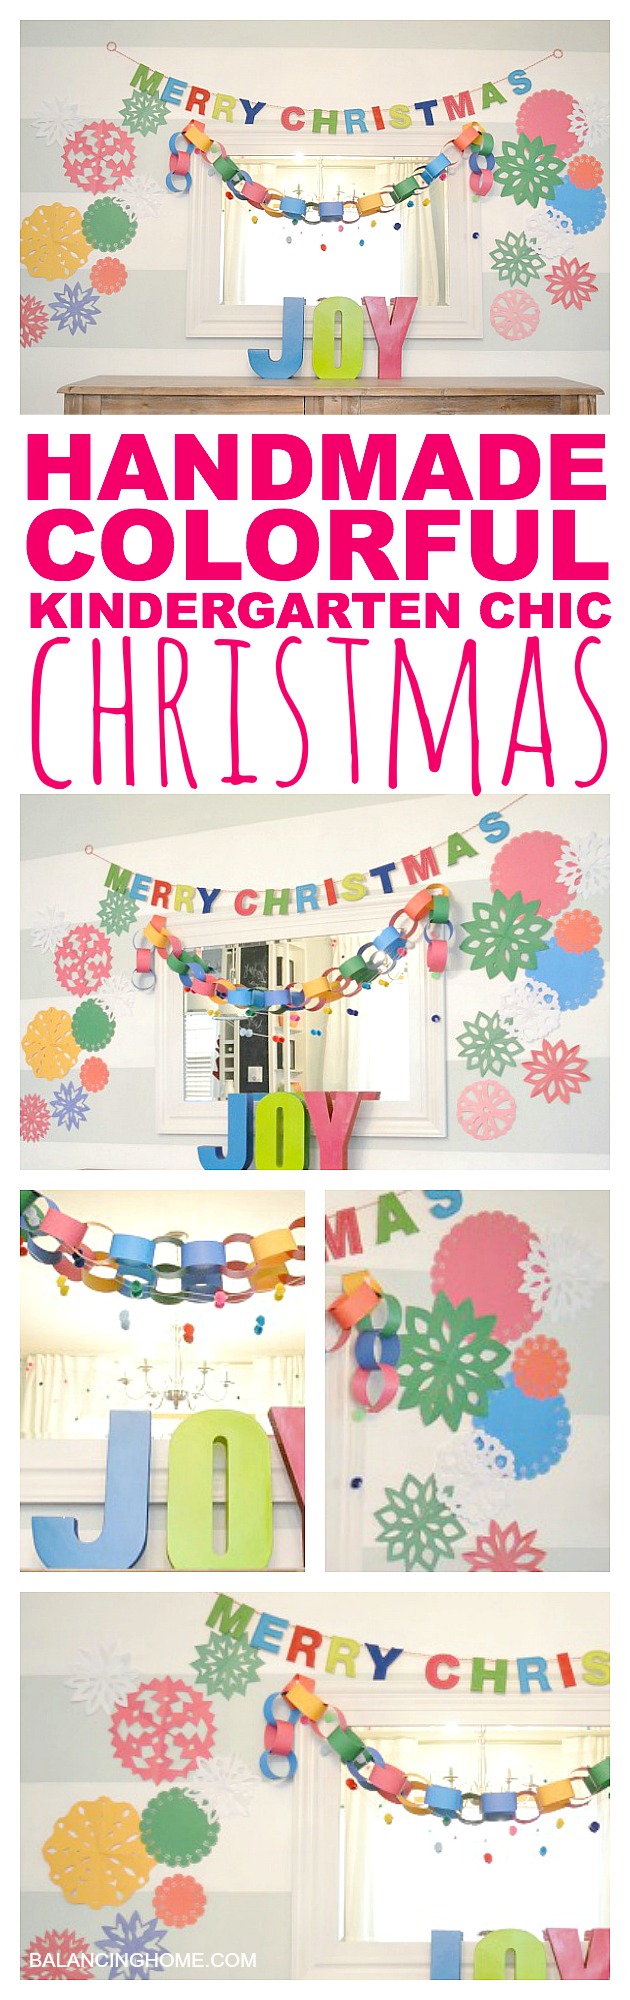 A handmade colorful kindergarten chic Christmas collage